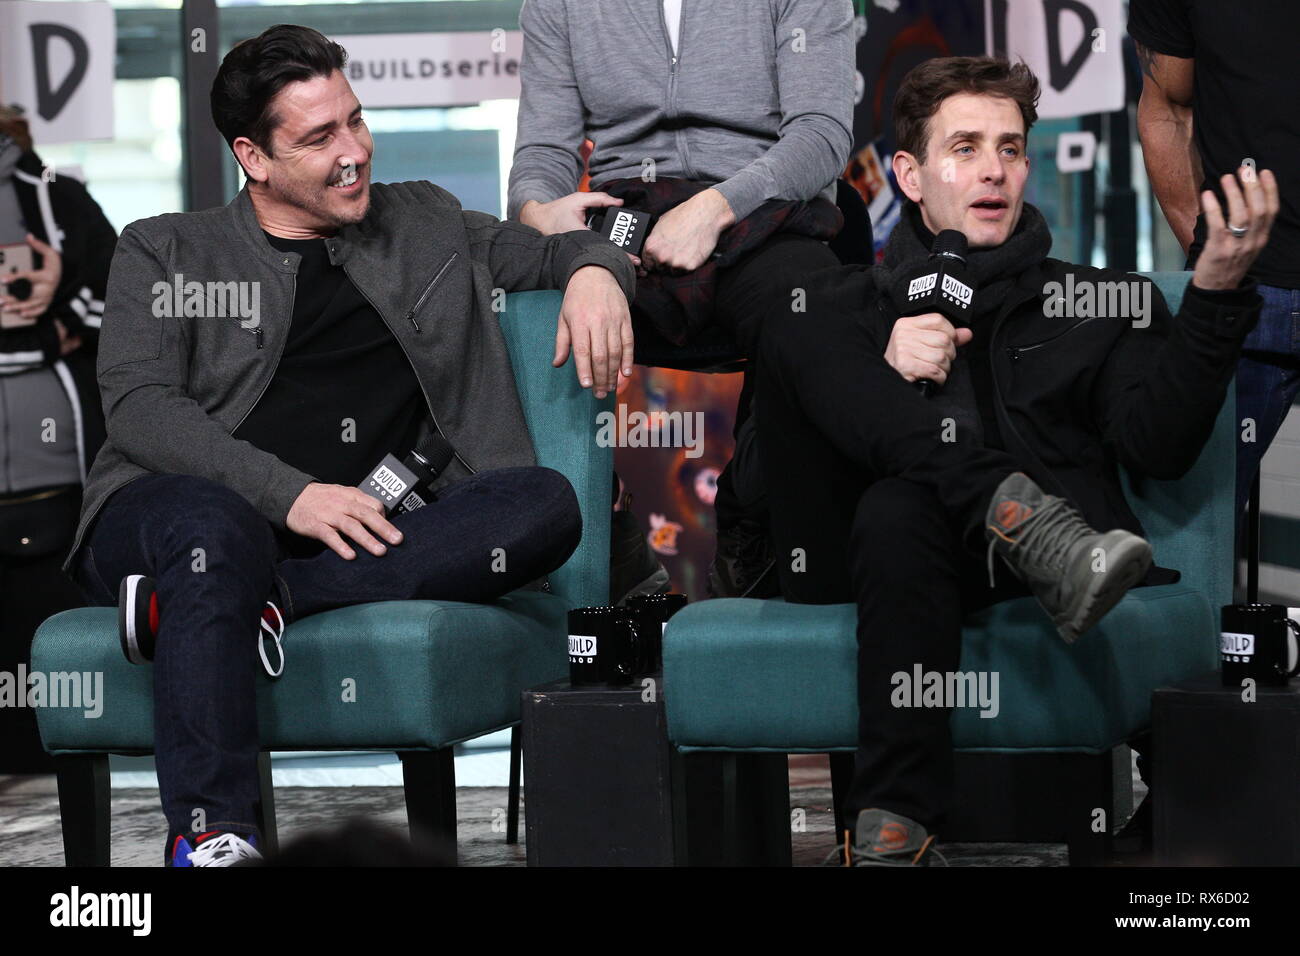 New York, USA. 08 Mar, 2019. Jordan Knight, Joey McIntyre at The Friday, Mar 8, 2019 BUILD Series with New Kids On The Block discussing The 'Hangin' Tough' reissue at BUILD Studio in New York, USA. Credit: Steve Mack/S.D. Mack Pictures/Alamy Live Credit: Steve Mack/Alamy Live News Stock Photo